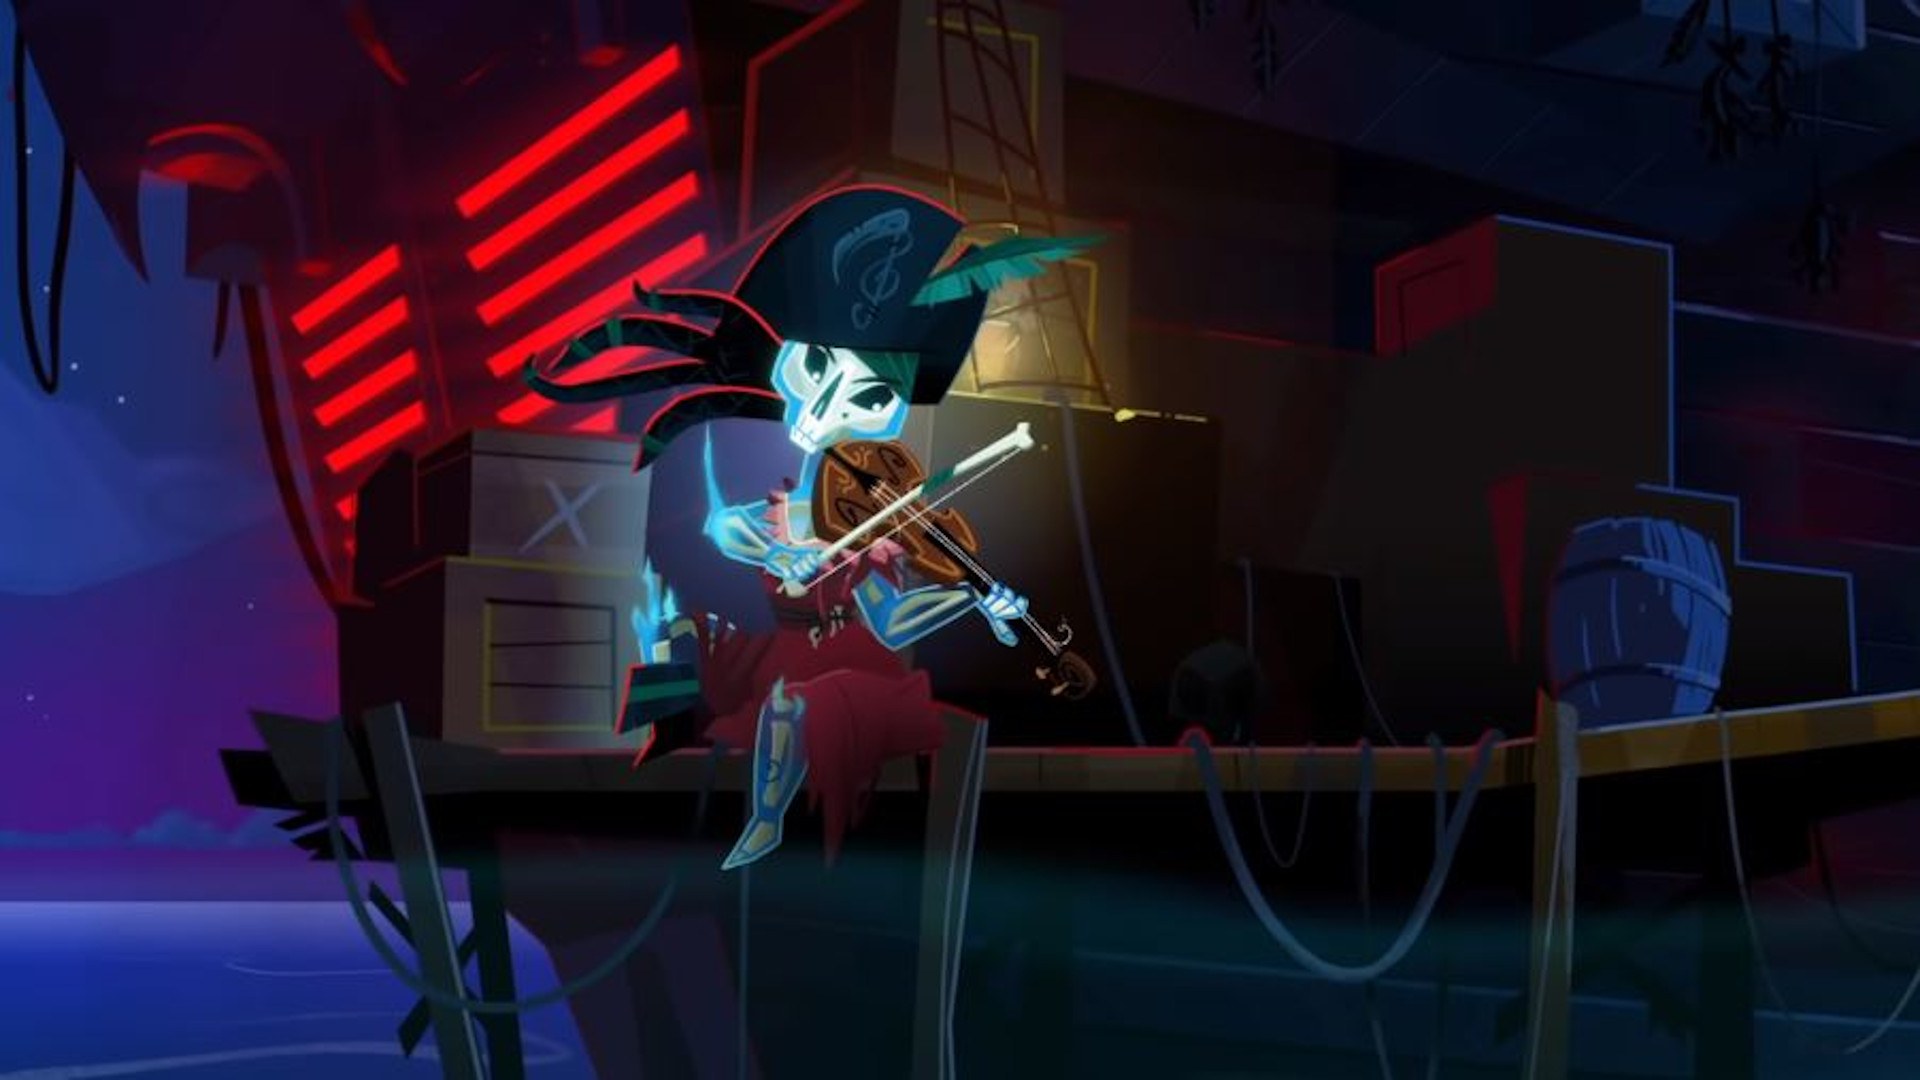 Return to Monkey Island: A ghostly pirate plays the violin